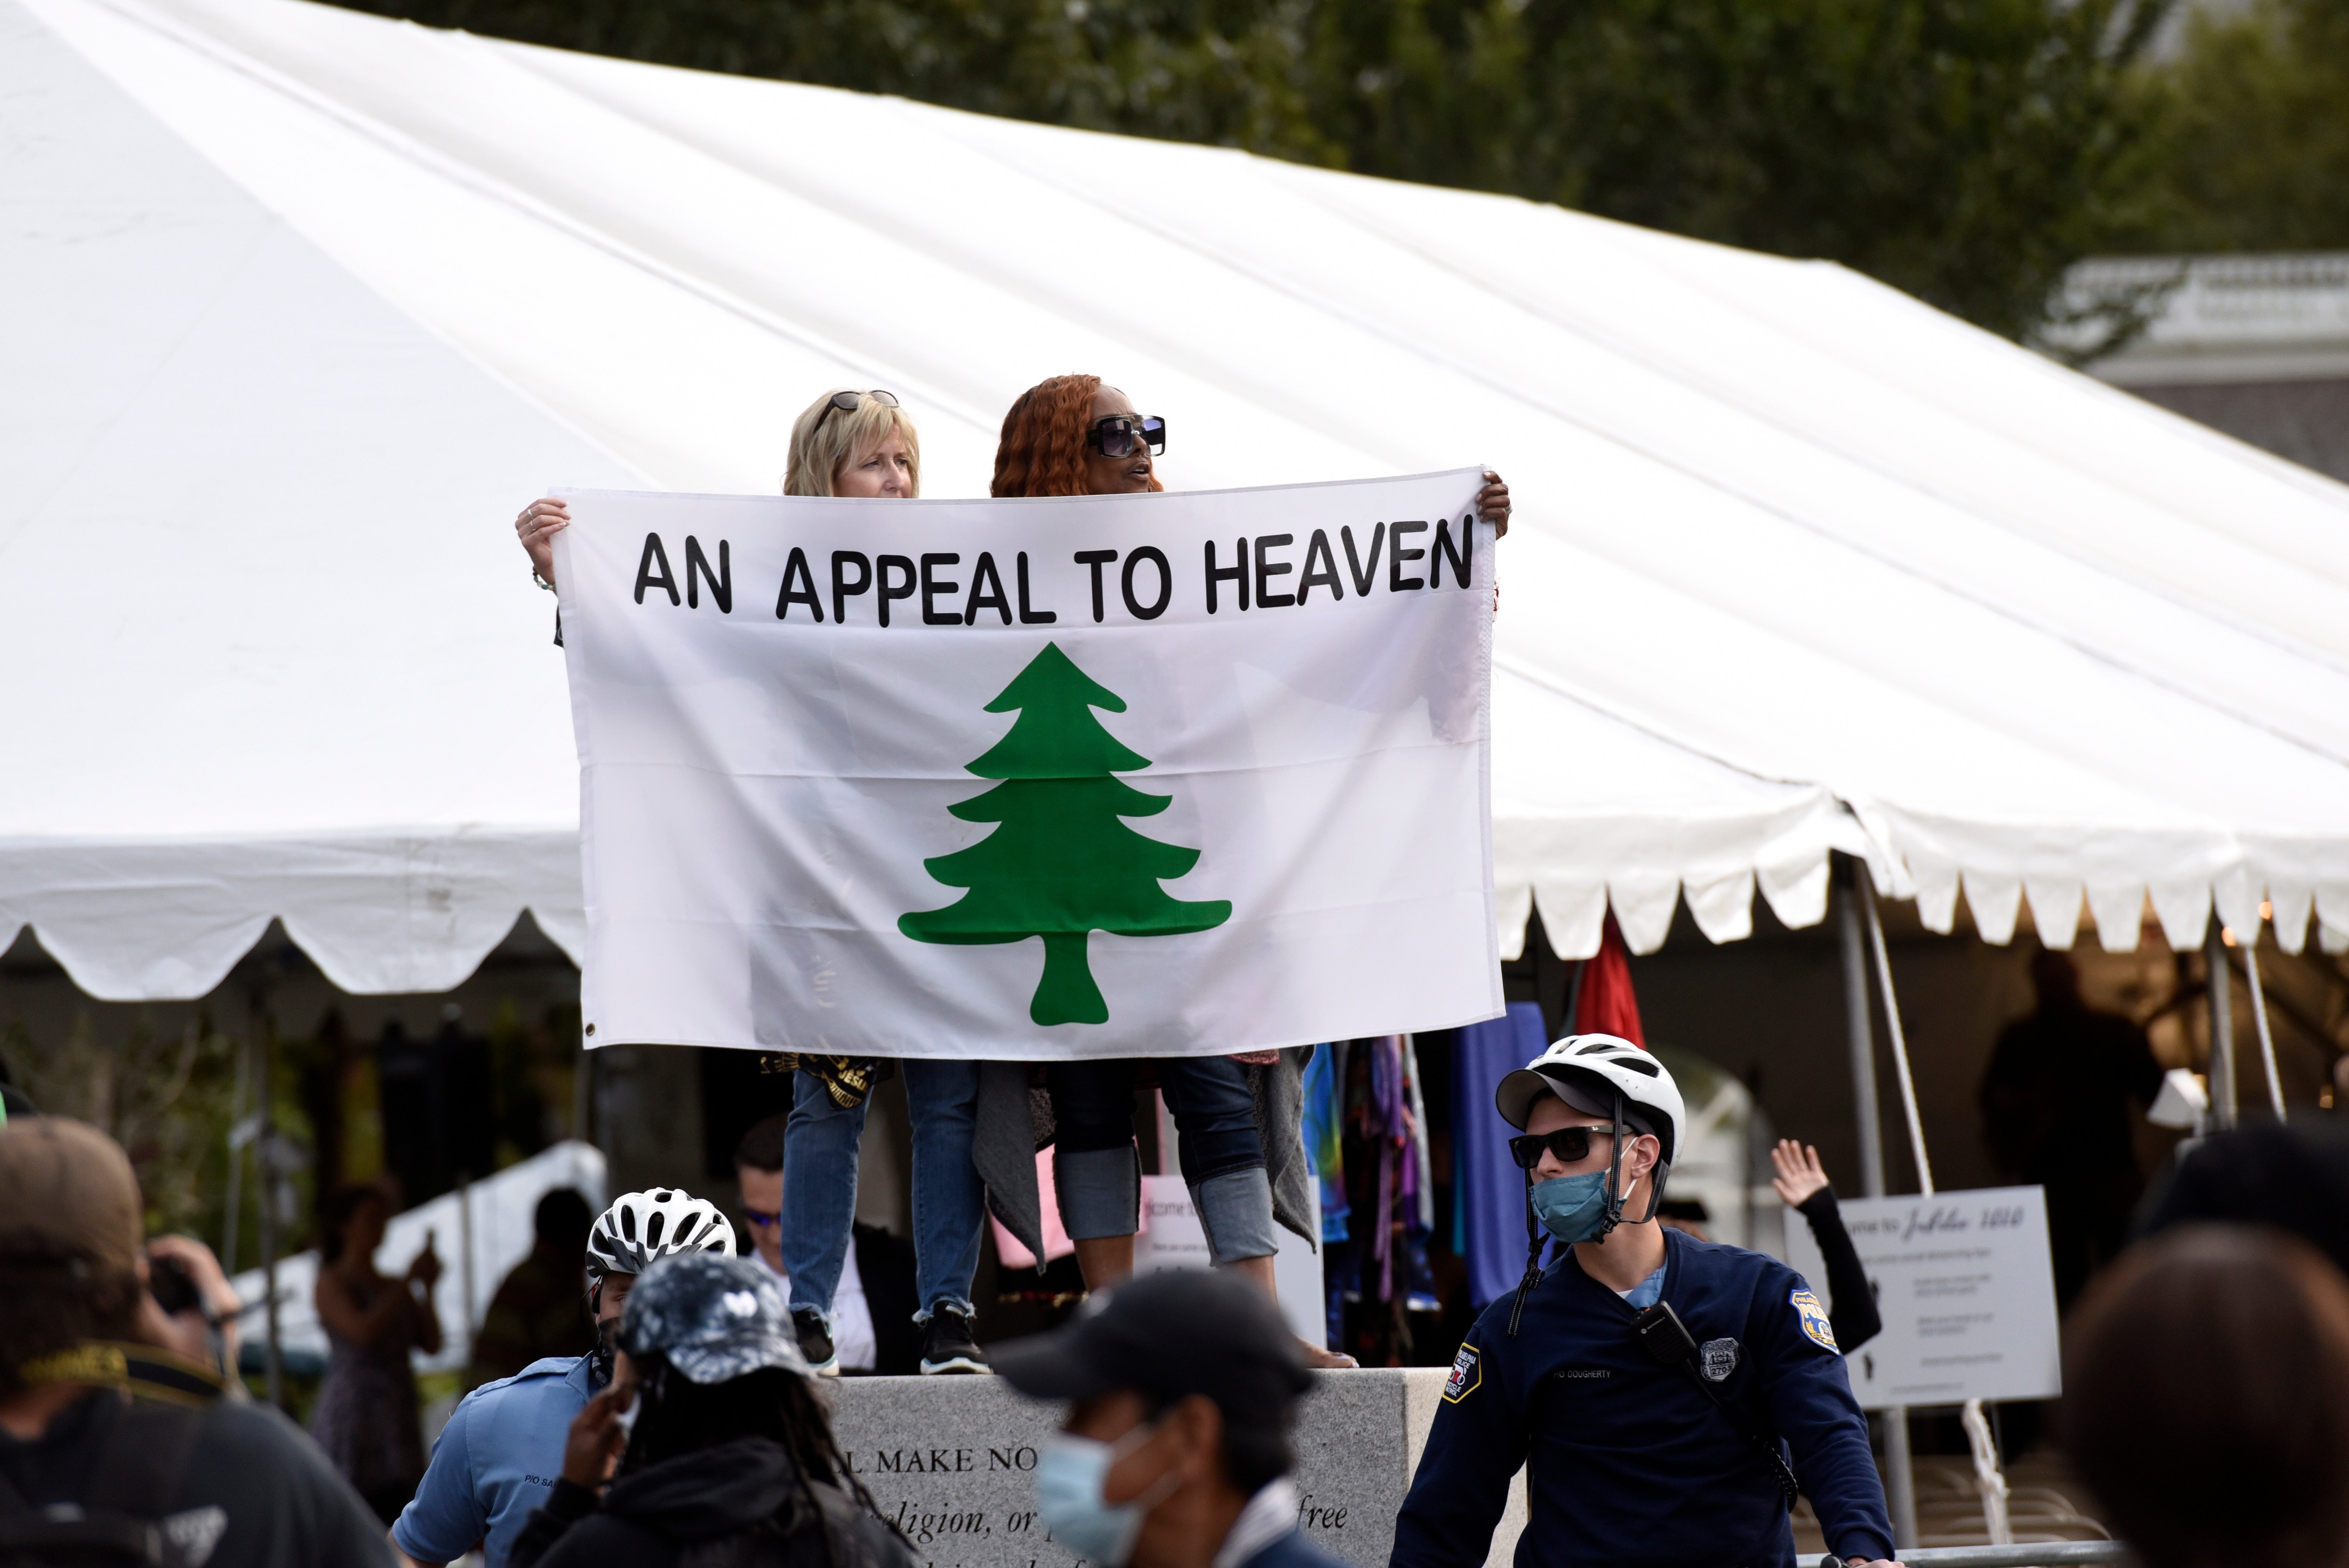 People carry an "Appeal To Heaven" flag as they gather at Independence Mall to support president Donald Trump during a visit to the National Constitution Center to participate in the ABC News town hall, on 15 September 2020 in Philadelphia